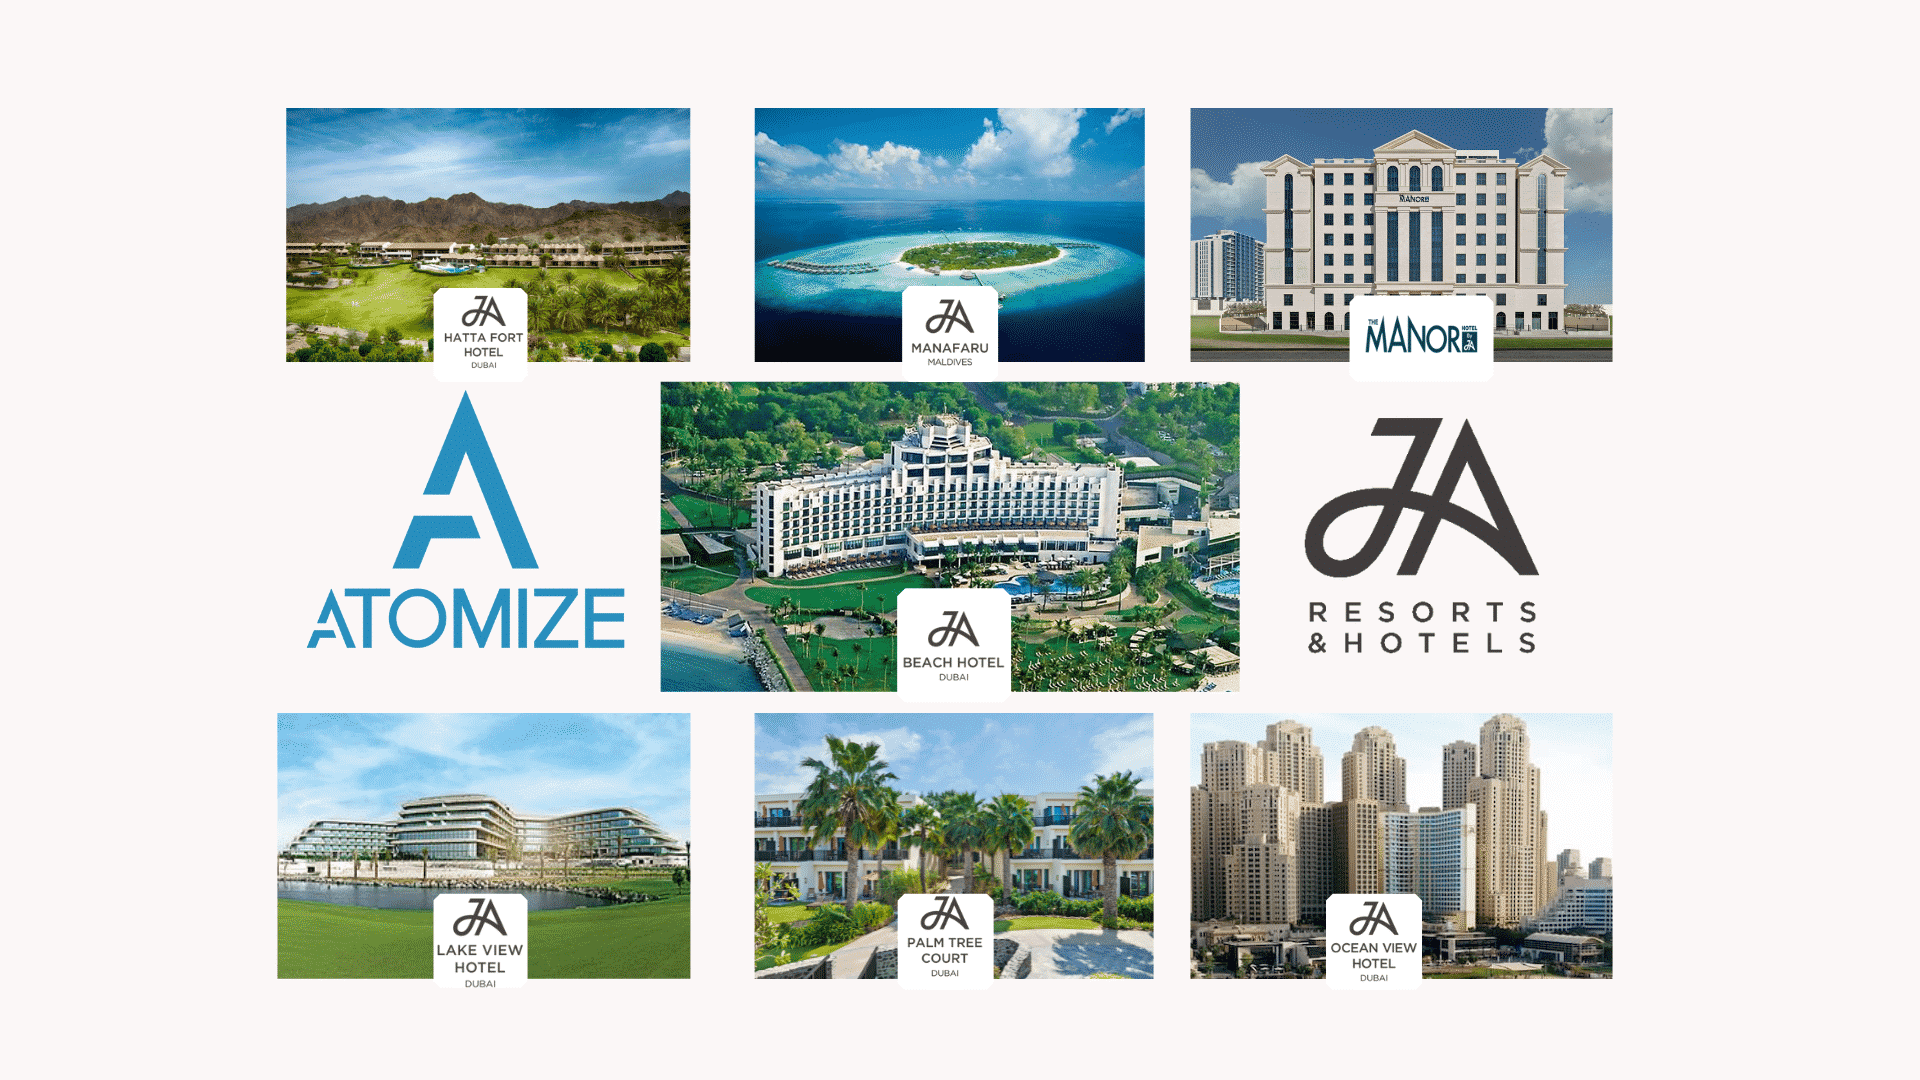 image for press release about JA Resorts choosing Atomize RMS